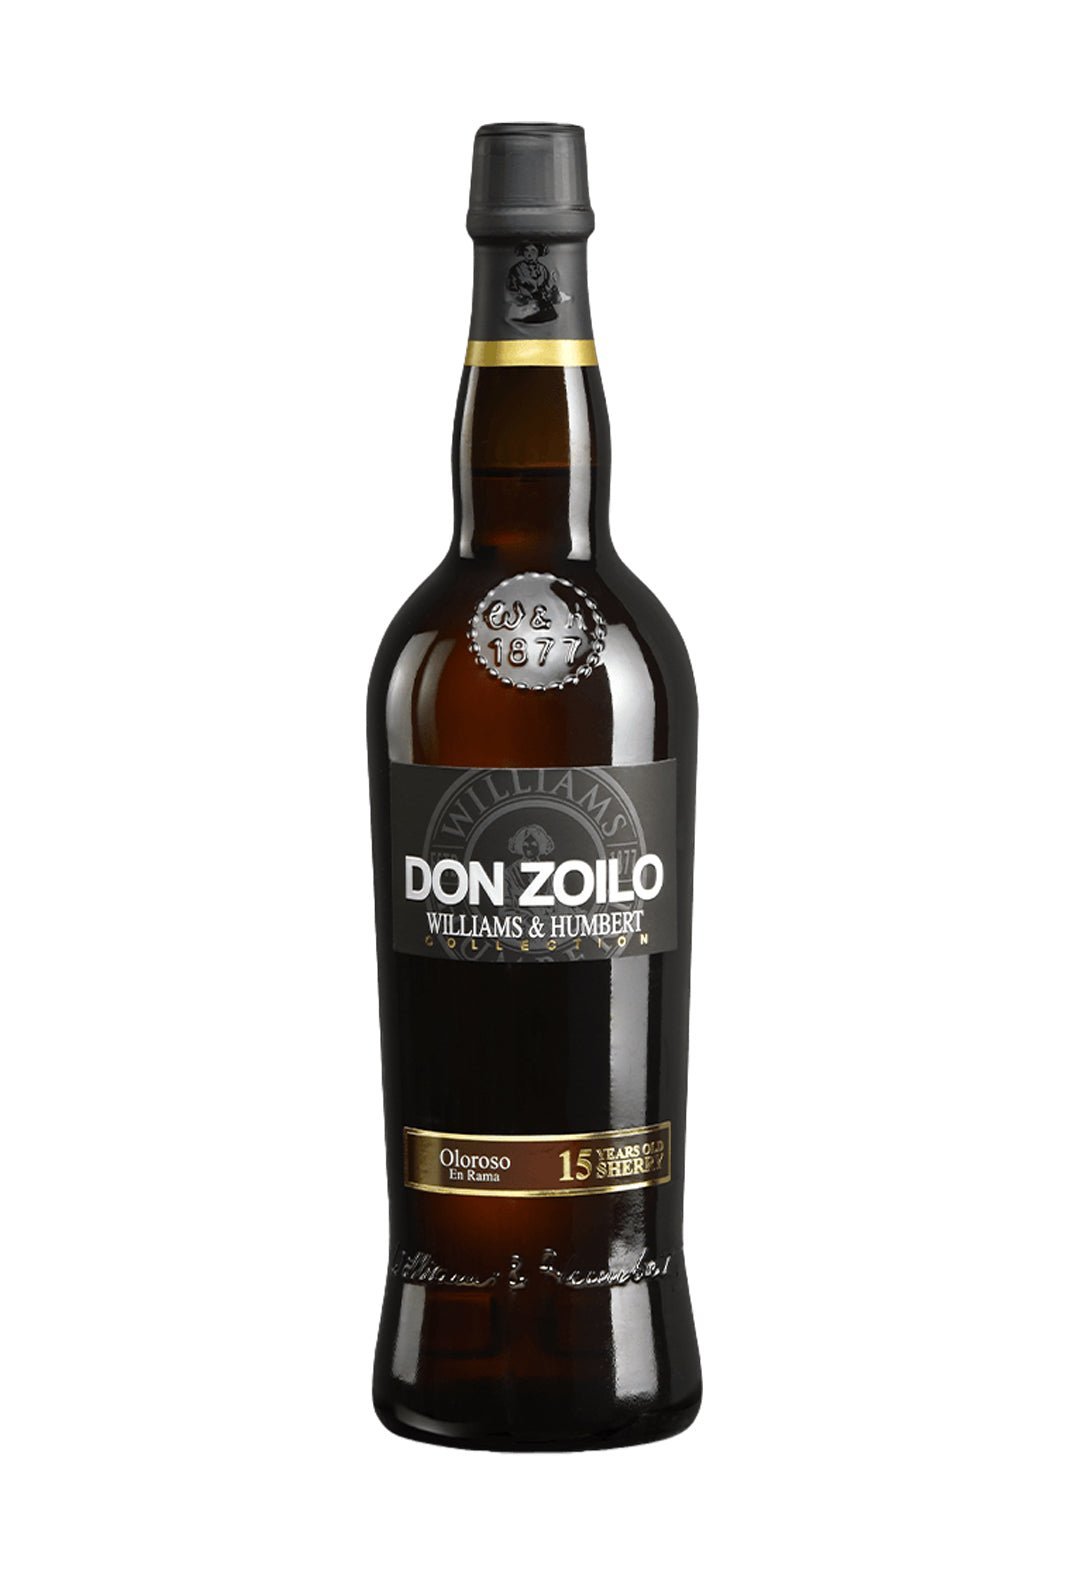 Don Zoilo Sherry Aperitif Oloroso 15 years 19% 750ml | Liquor & Spirits | Shop online at Spirits of France